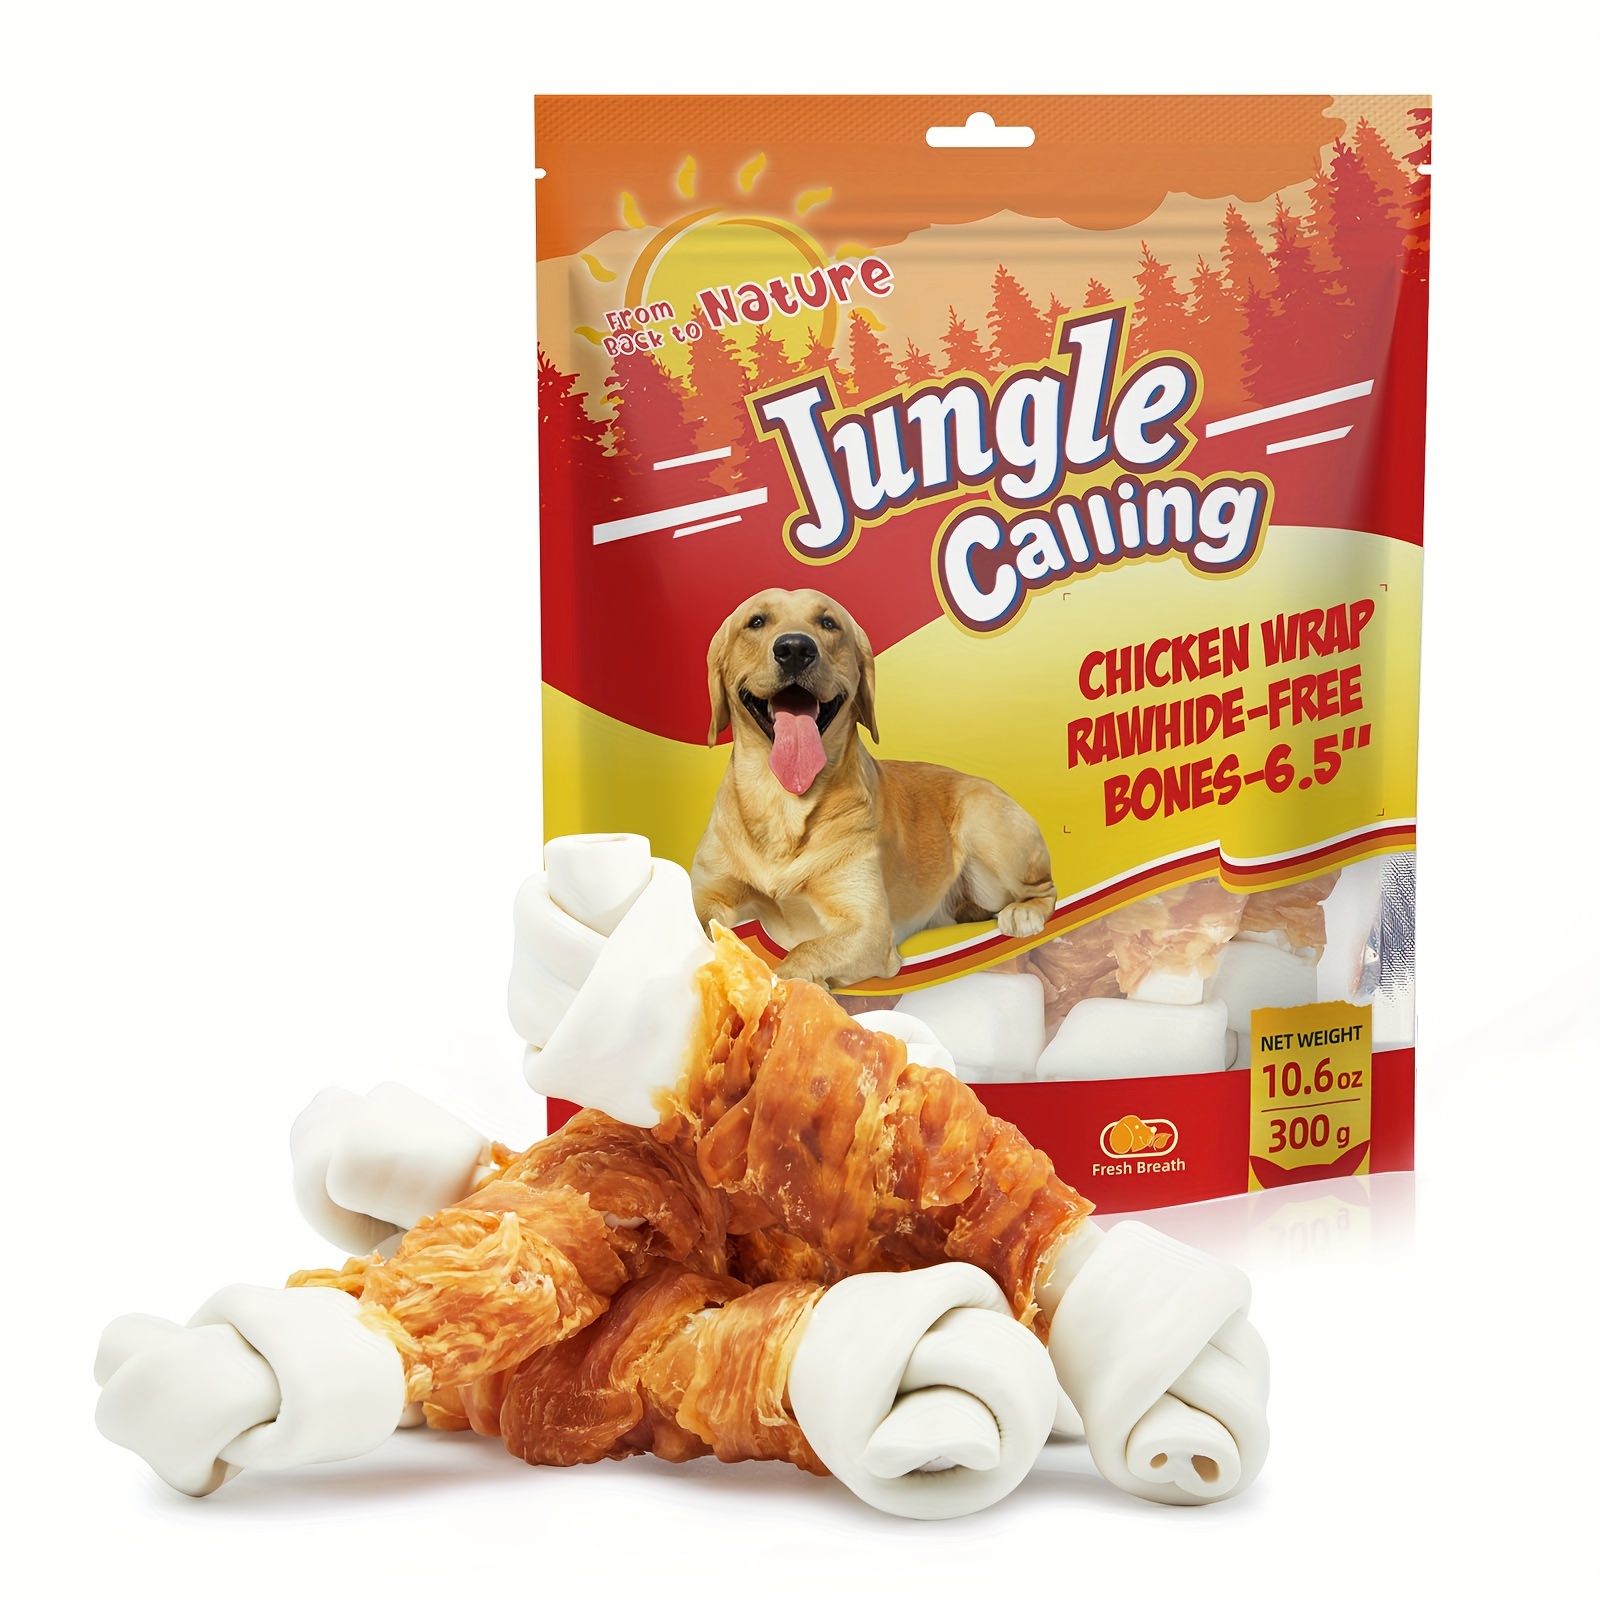 

Jungle Calling Free Dog Bones, 6.5" Real Chicken Wrapped Dog Chew Bones For Medium And Large Dogs Training Treats